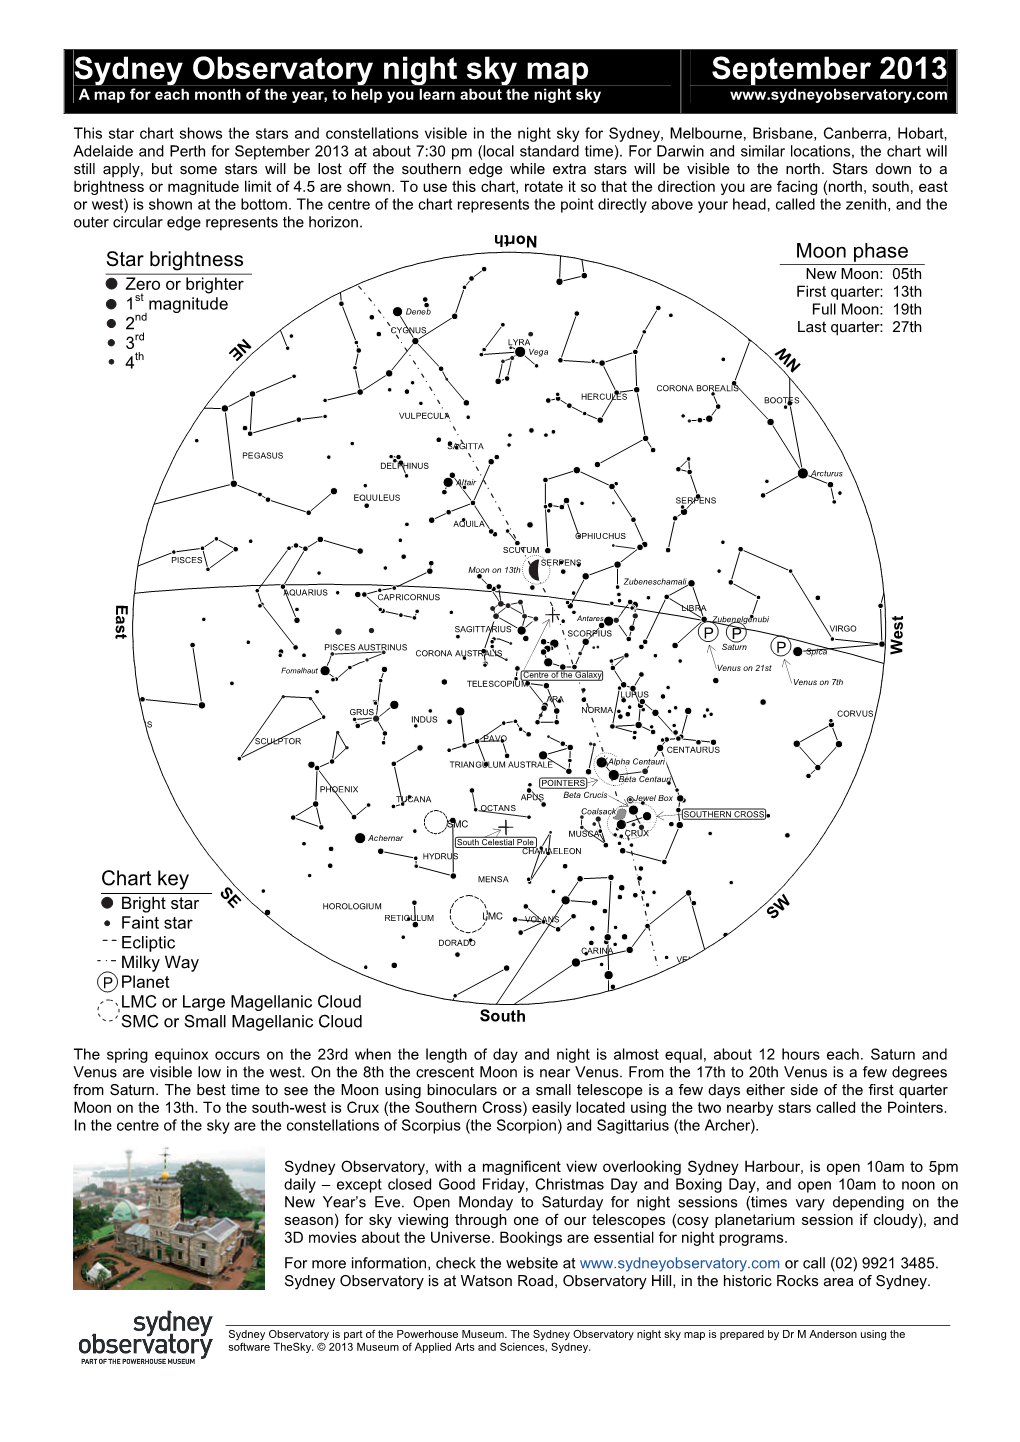 Sydney Observatory Night Sky Map September 2013 a Map for Each Month of the Year, to Help You Learn About the Night Sky